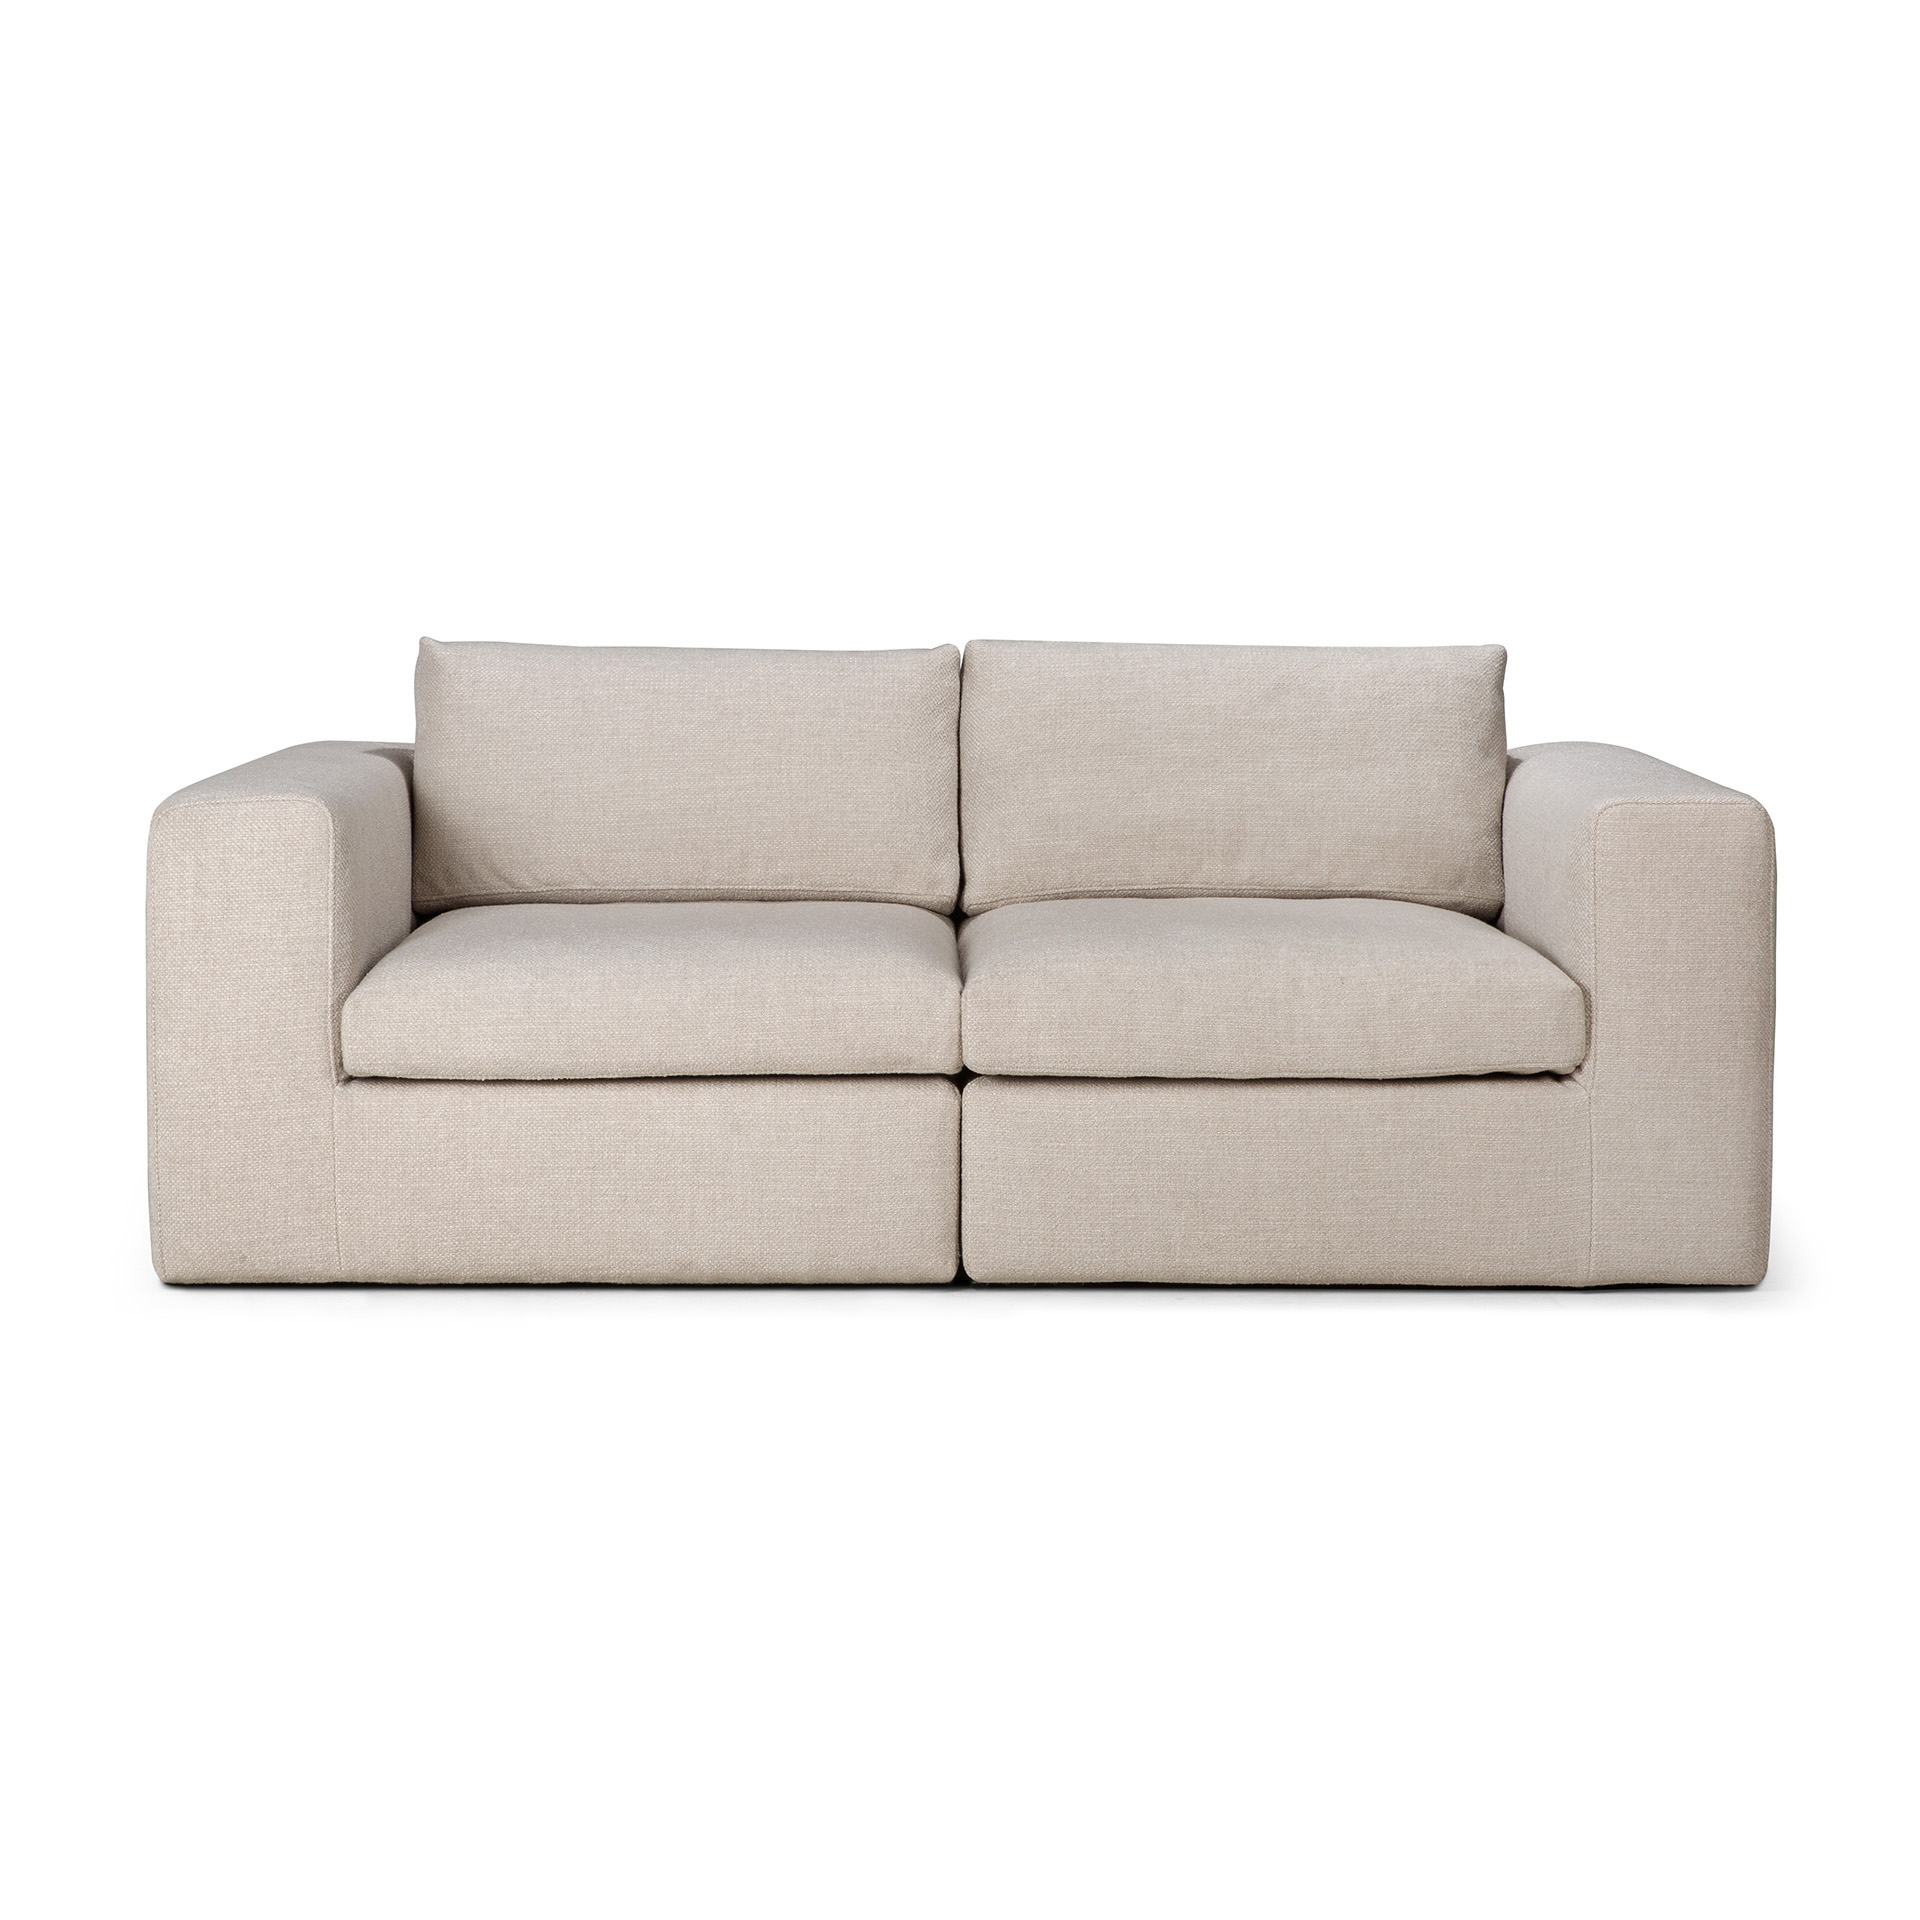 20025_Mellow_sofa_Ivory_fabric_end_seater_Left_and_Right_configuration_cut_web